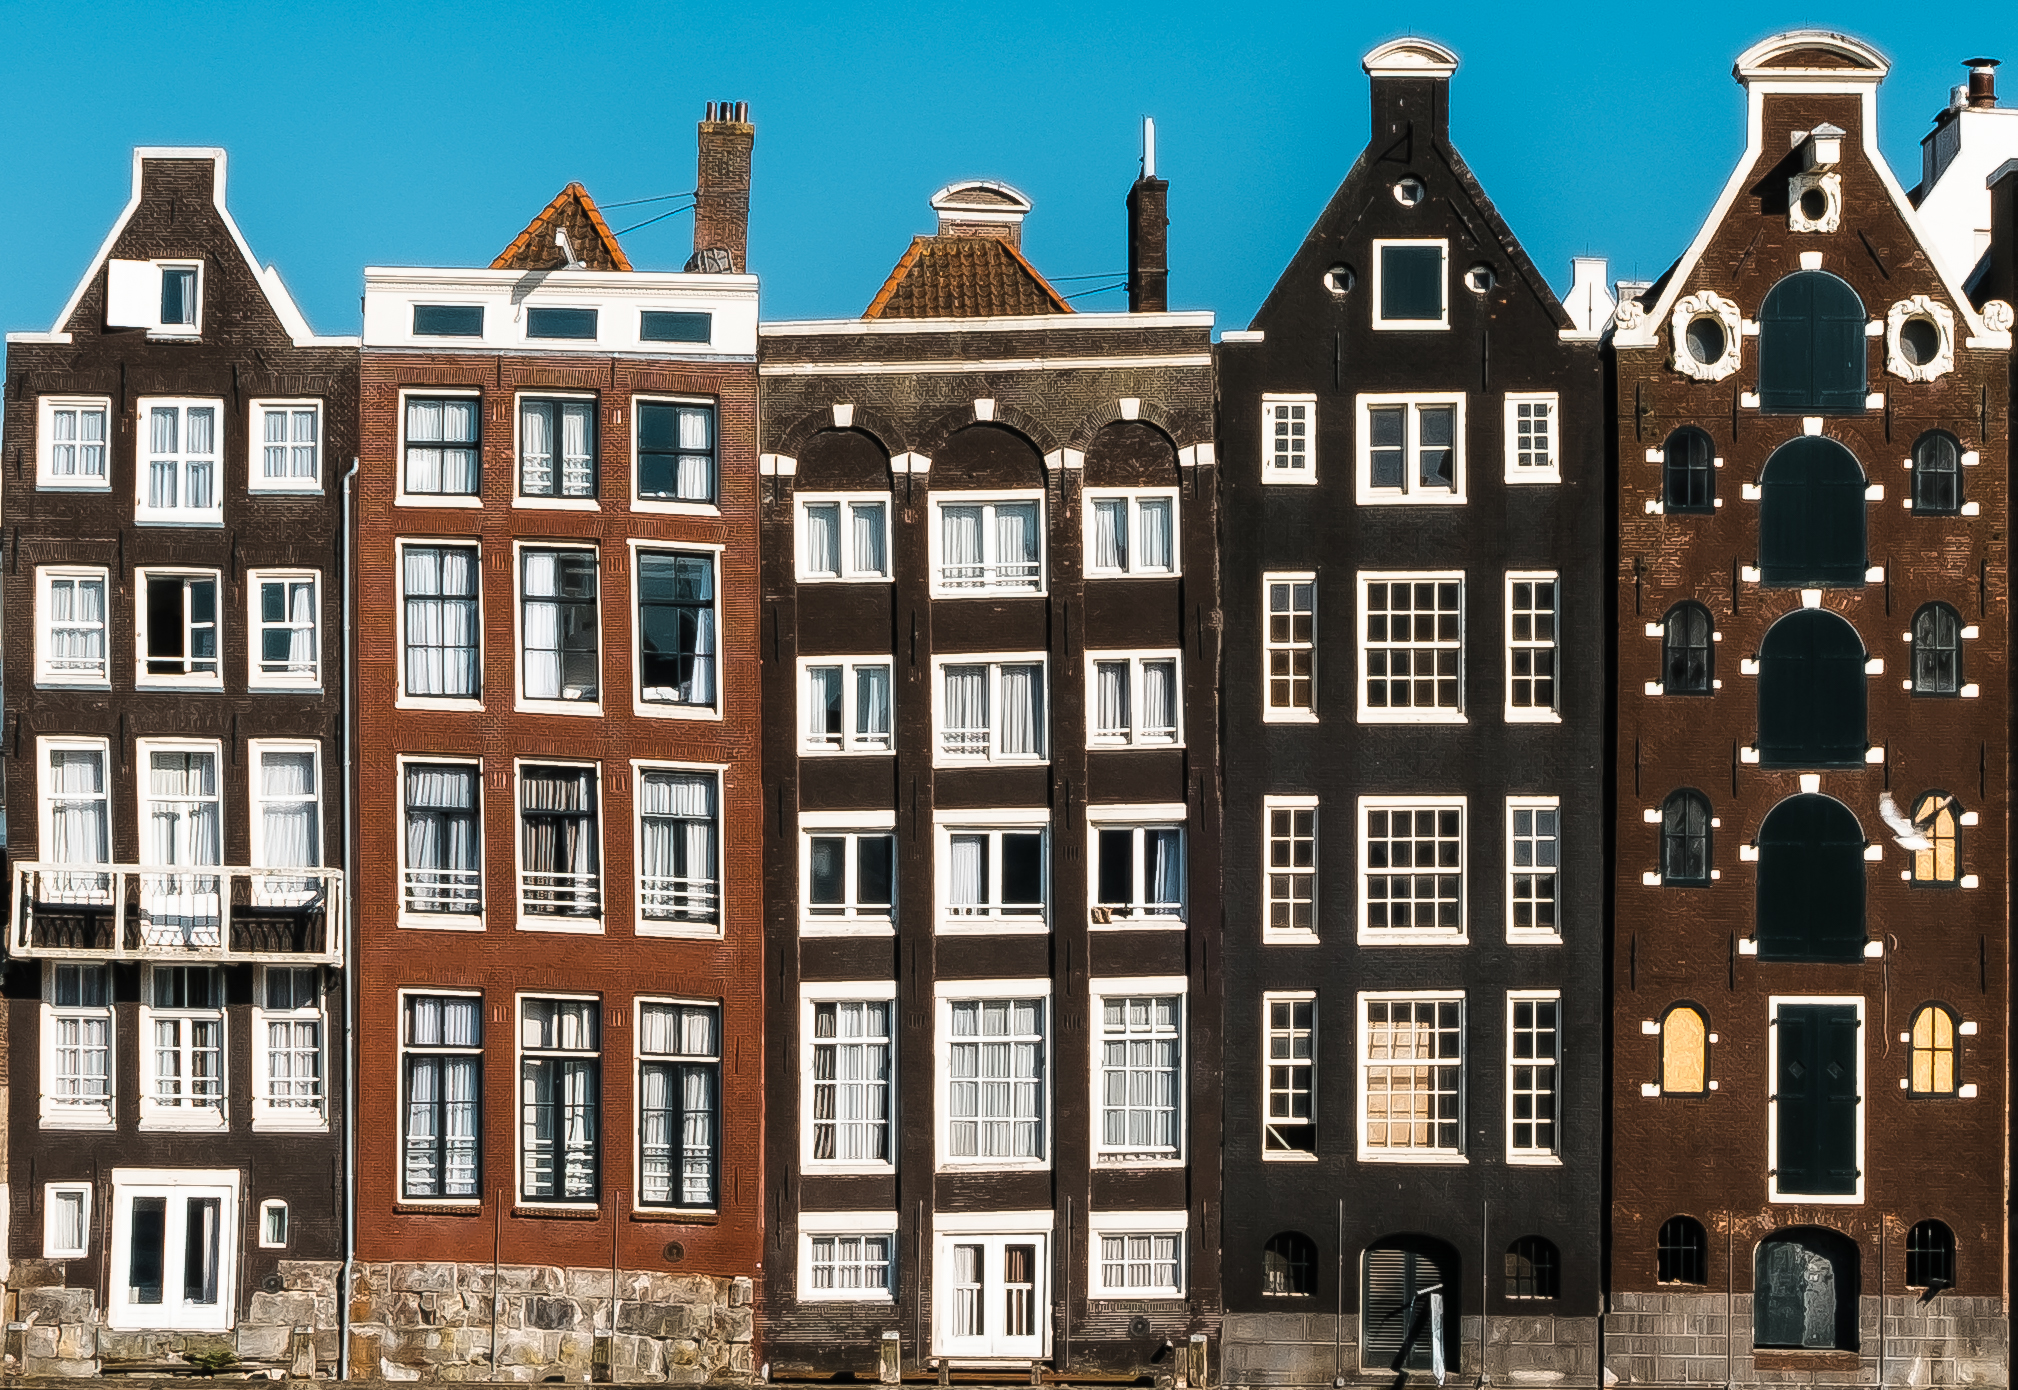 The houses of Amsterdam...